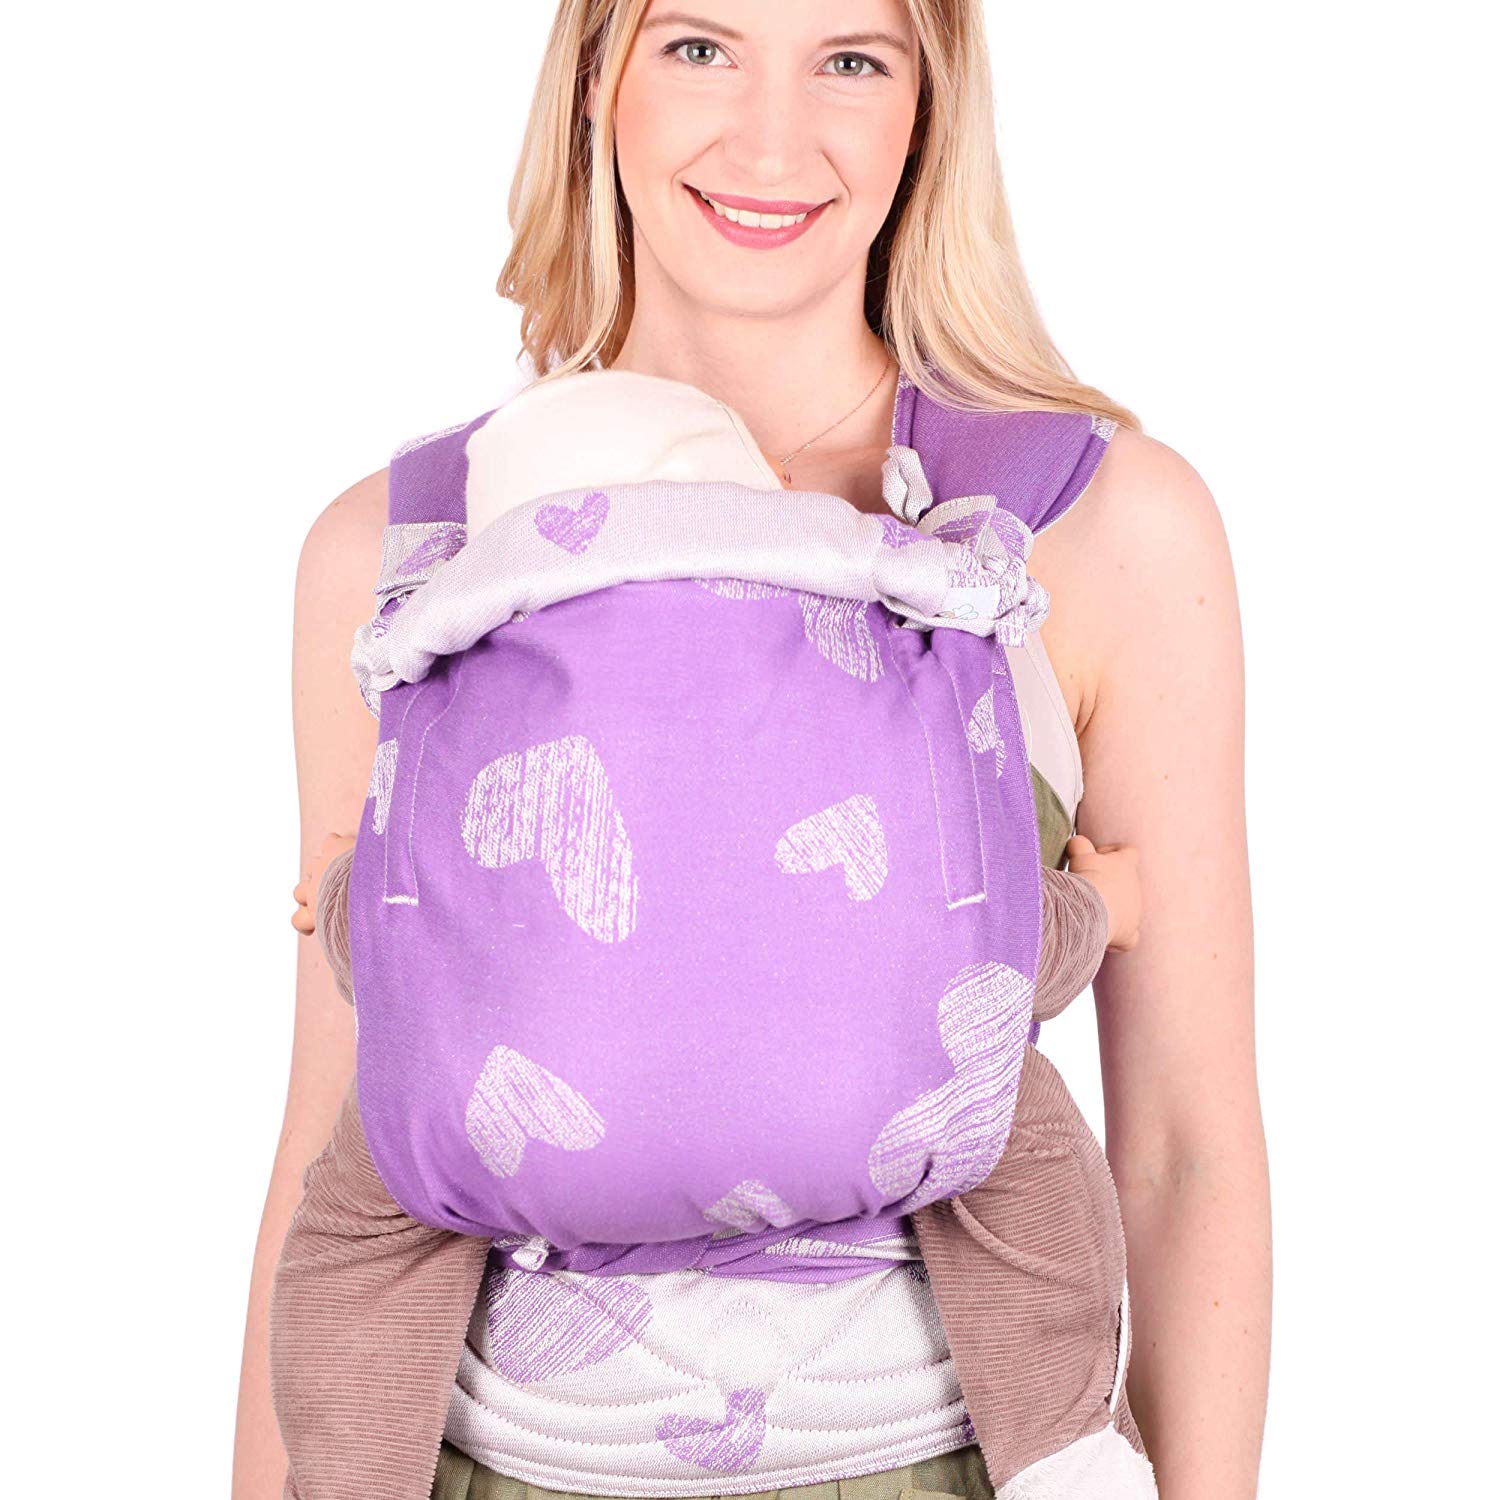 Schmusewolke Baby Carriers | Baby Carrier for Newborns from Birth and Toddlers with Organic Cotton | Front and Back Carrying